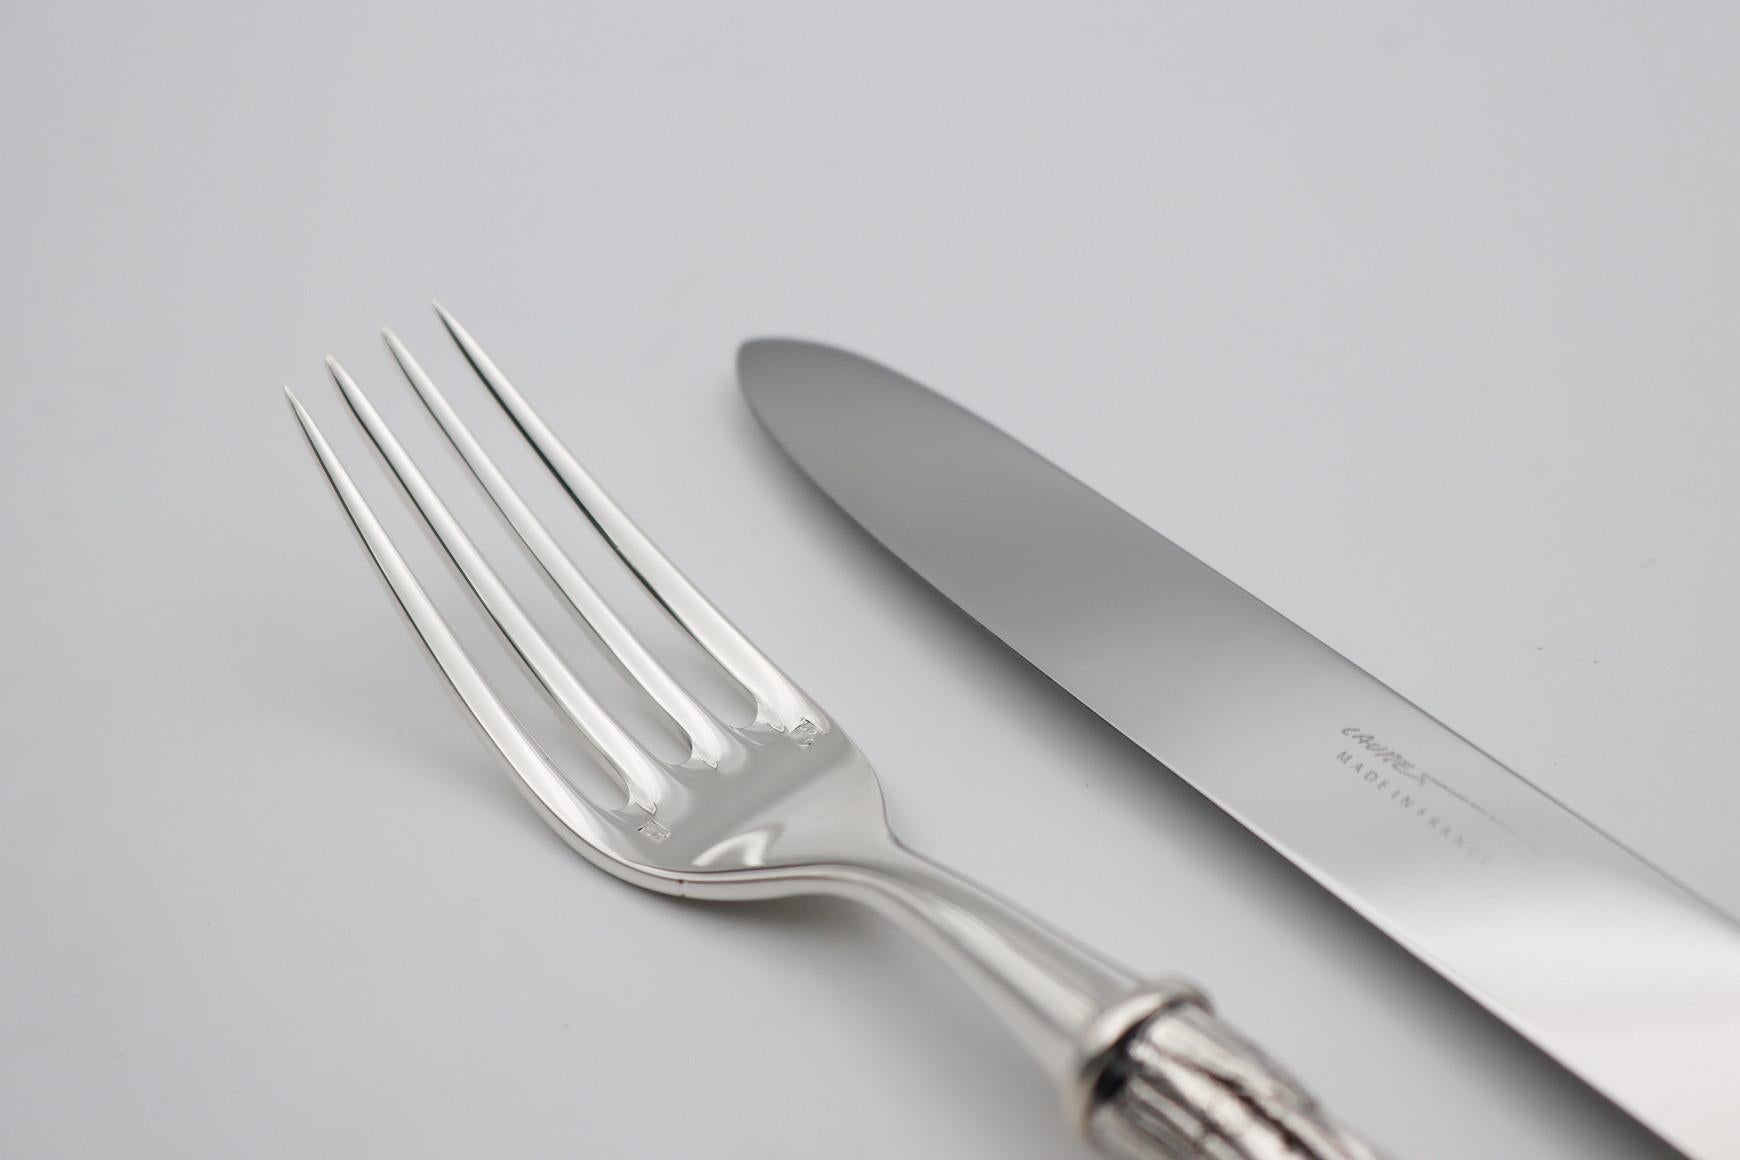 JARDINS DE GIVERNY Set of 2 pieces in silver bronze or gold bronze

Set of 2 pieces (table forks/fish, table knife or meat/fish knife) in silver bronze 35/42 microns

It is possible to order all products separately or set of 4 piece

Table